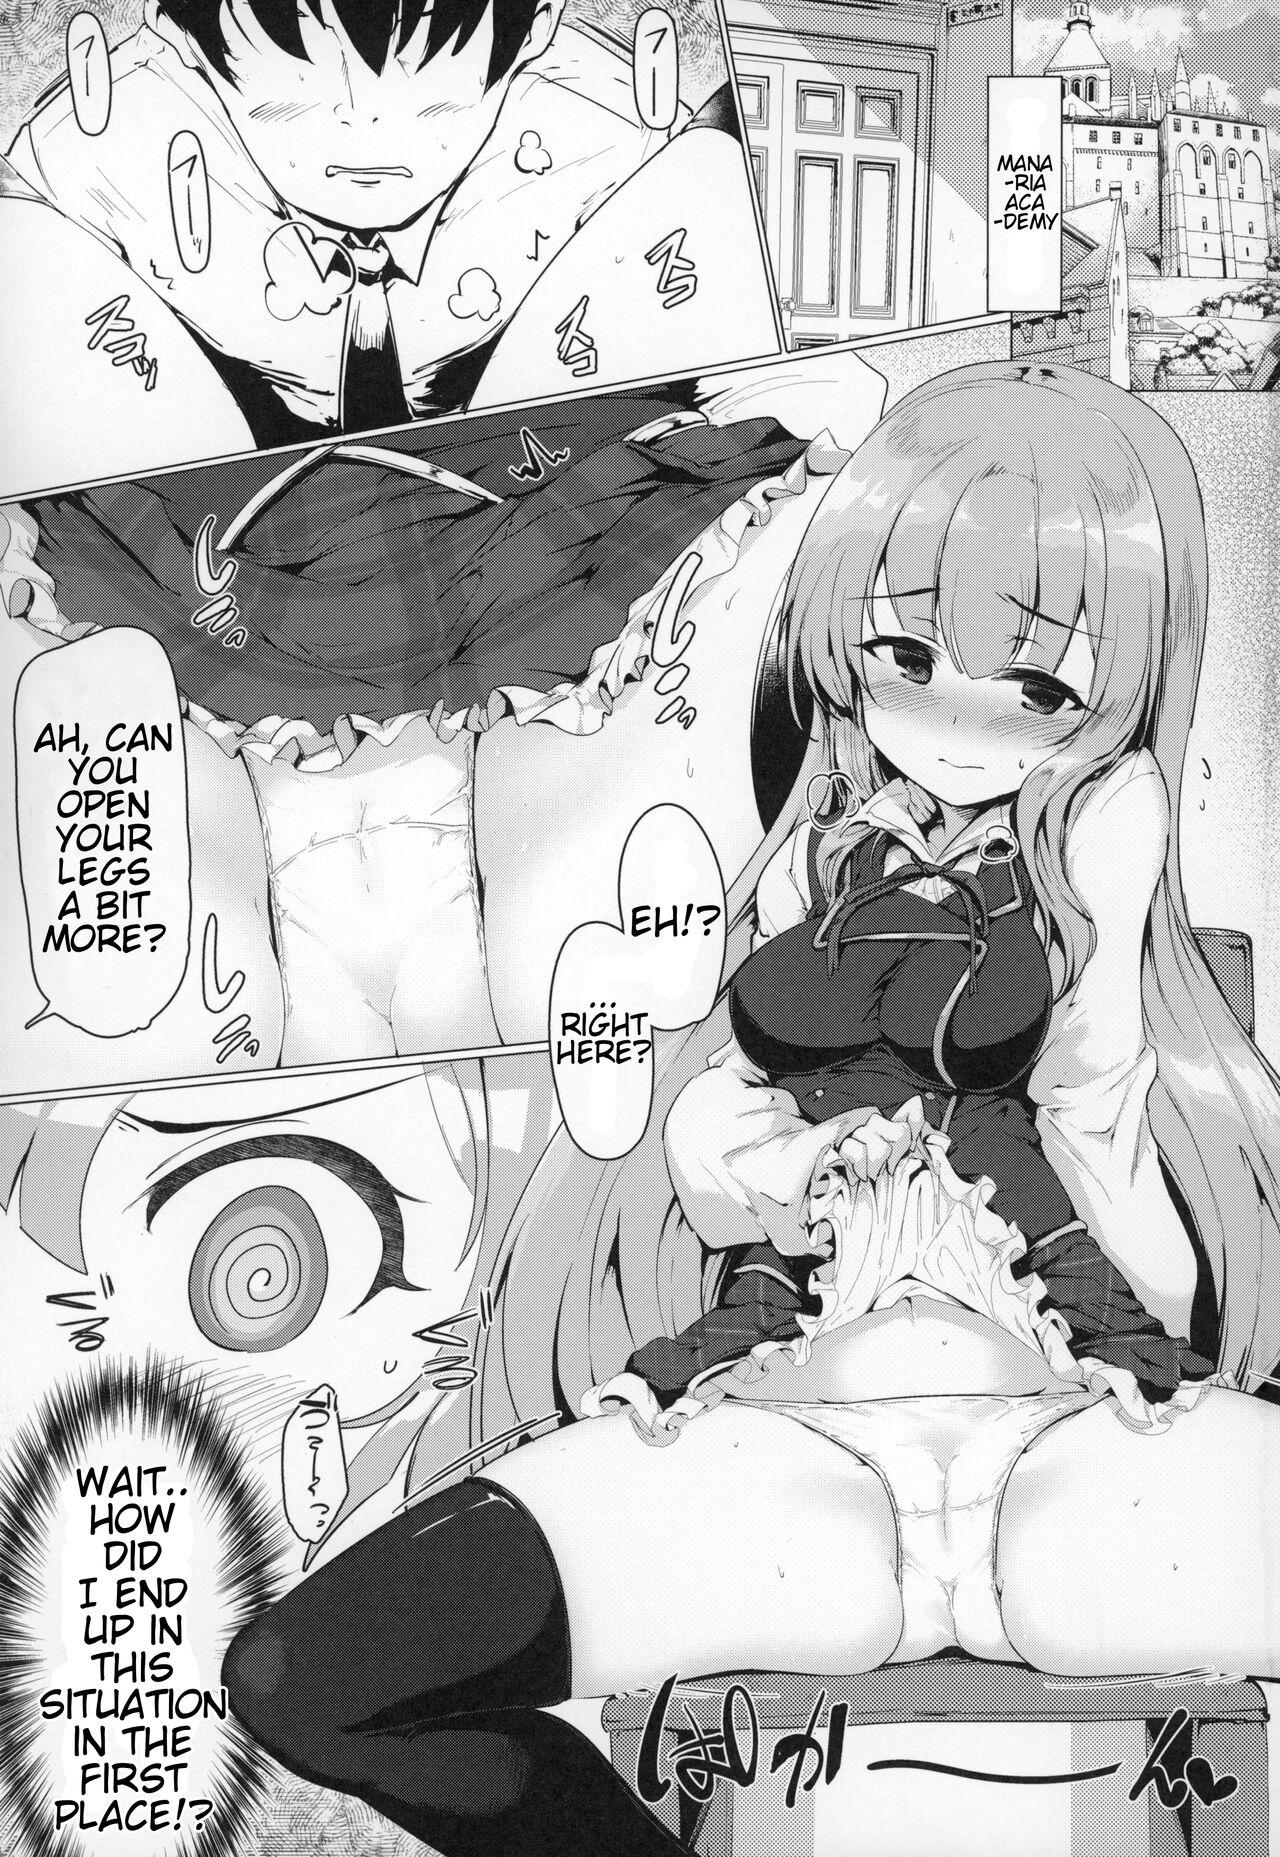 Women Sucking There's No Way An Ecchi Event Will Happen Between Me and the Princess of Manaria Kingdom! - Manaria friends Amature Porn - Page 4